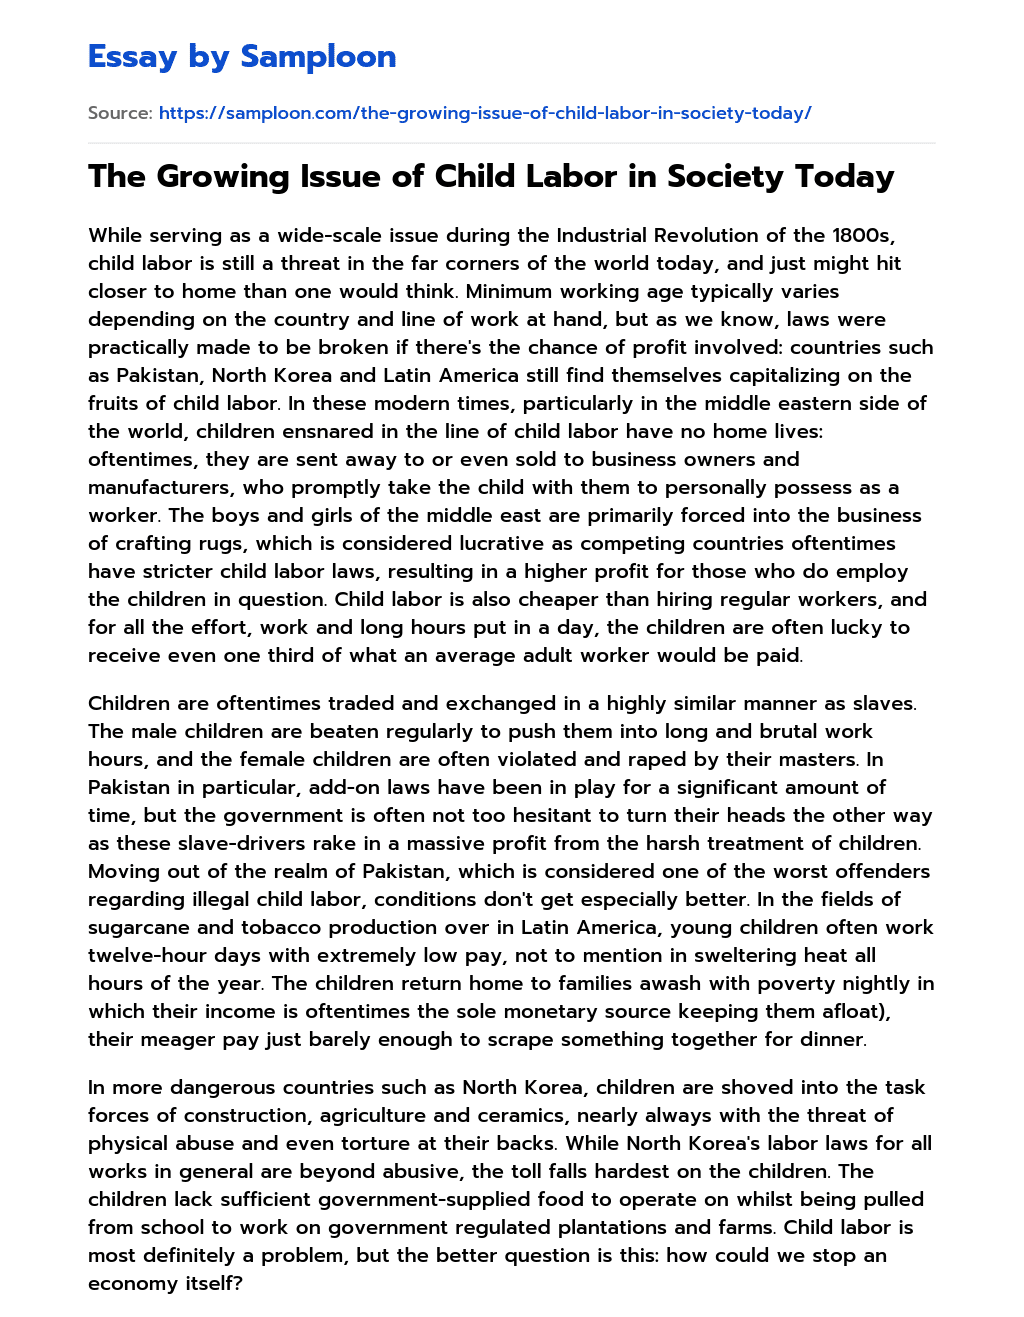 The Growing Issue of Child Labor in Society Today essay